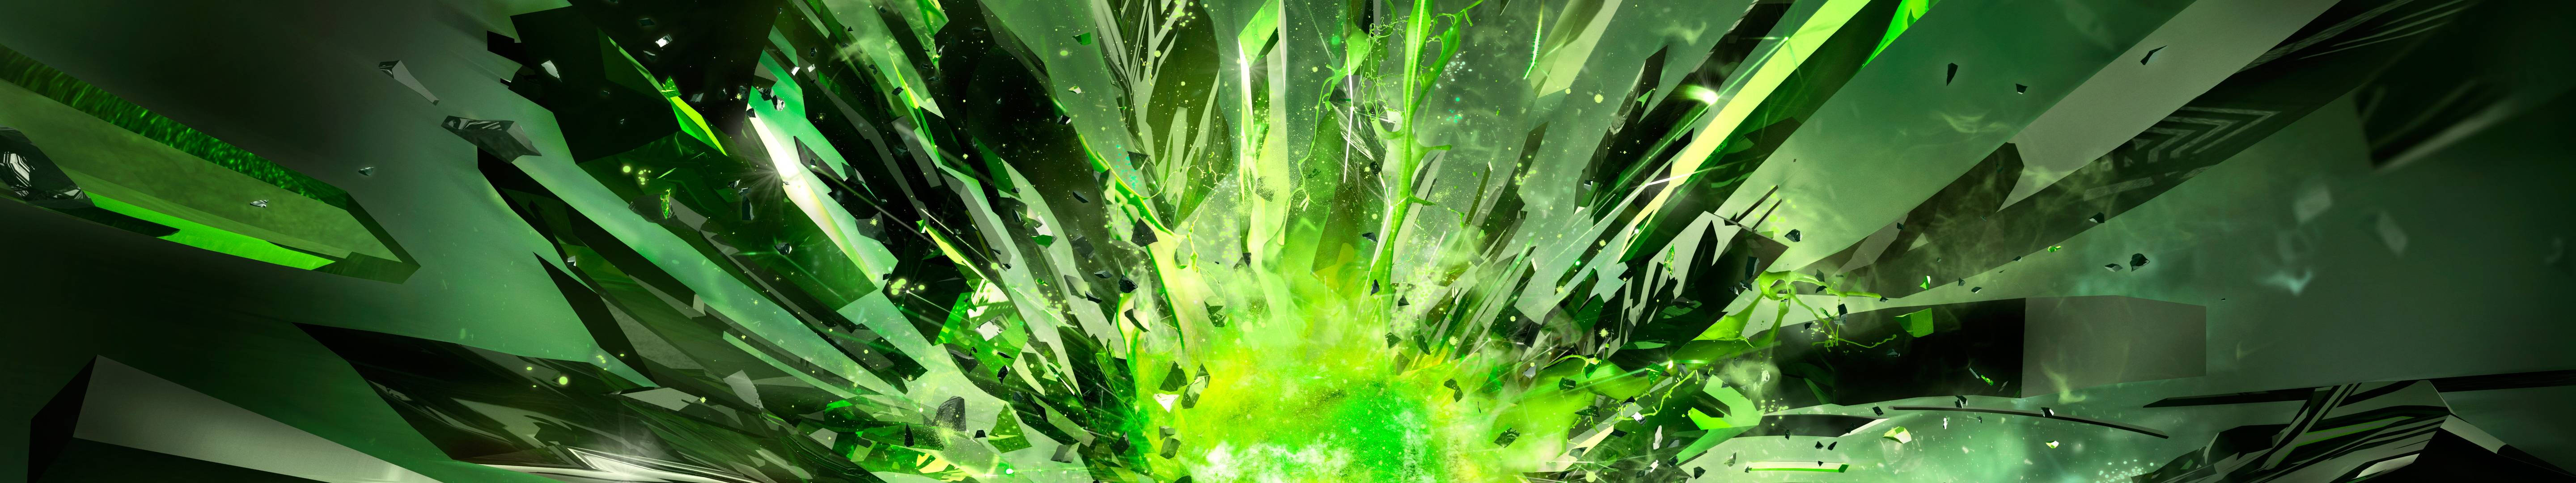 A breathtaking display of vibrant green crystals exploding from the center Wallpaper